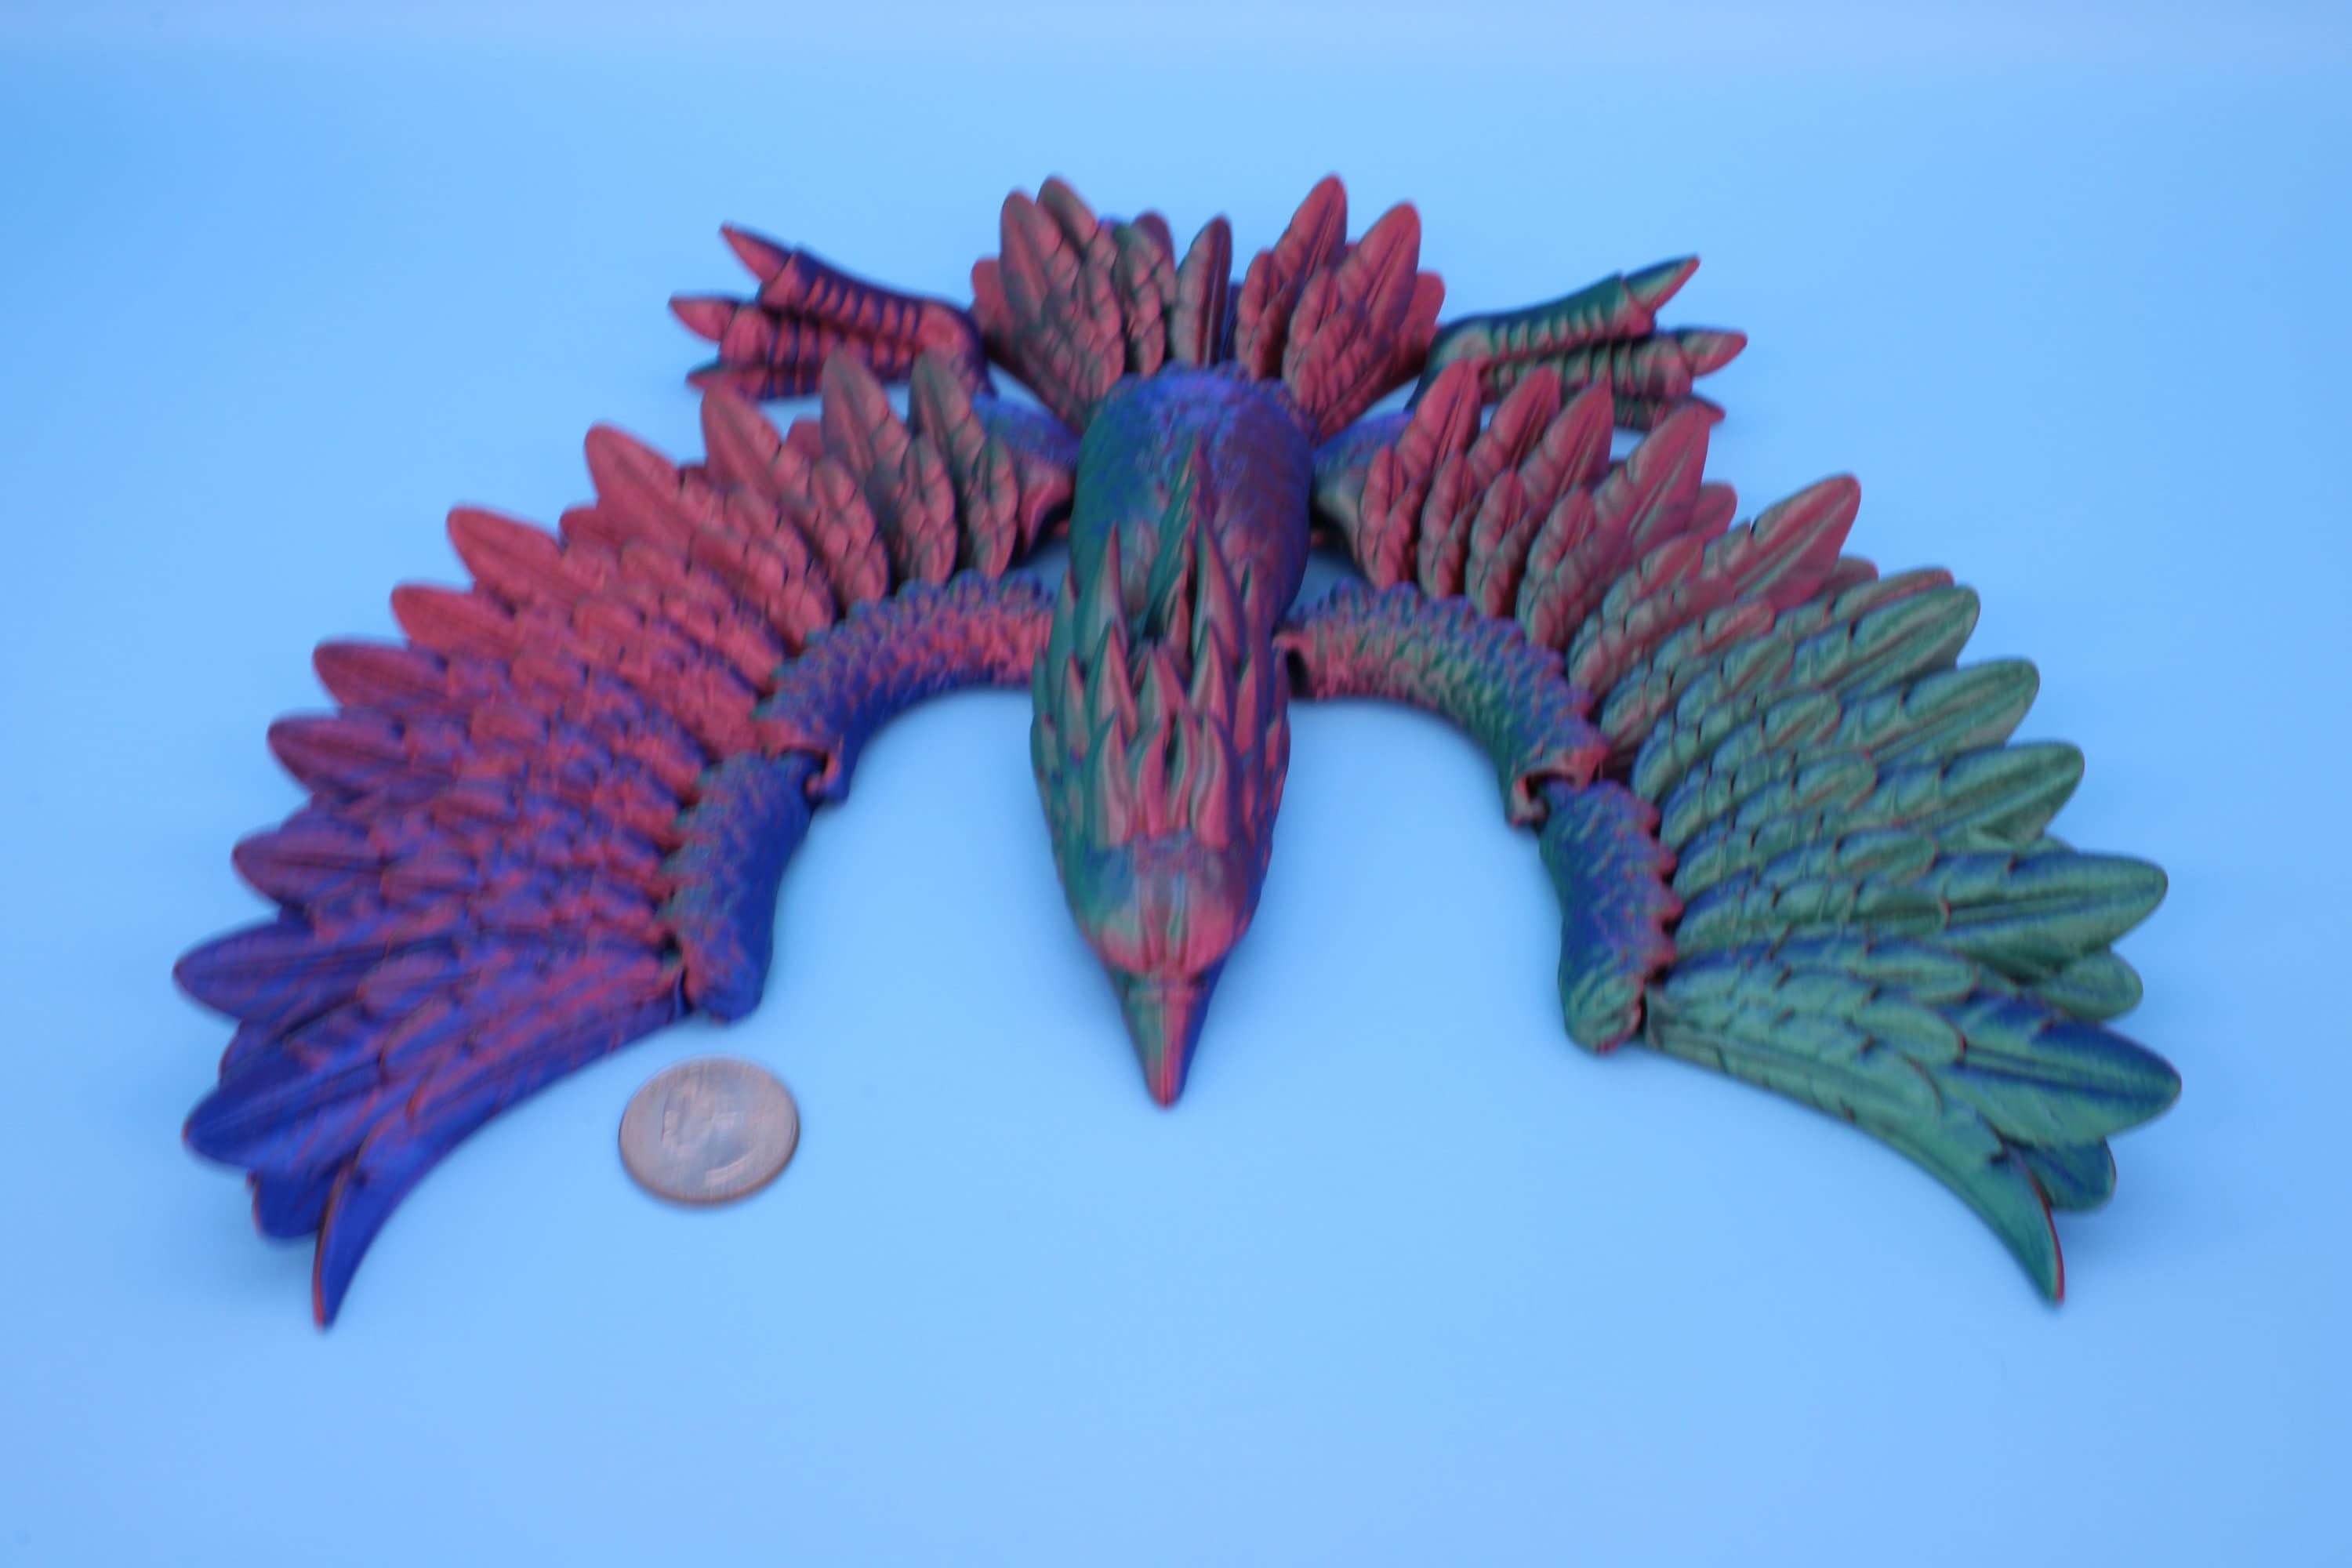 XL Phoenix Rainbow | Cute Flexi | Unique 3D printed. | Great Articulating fidget toy, desk, sensory toy | 5.5 inch tall | 10 in wing span.